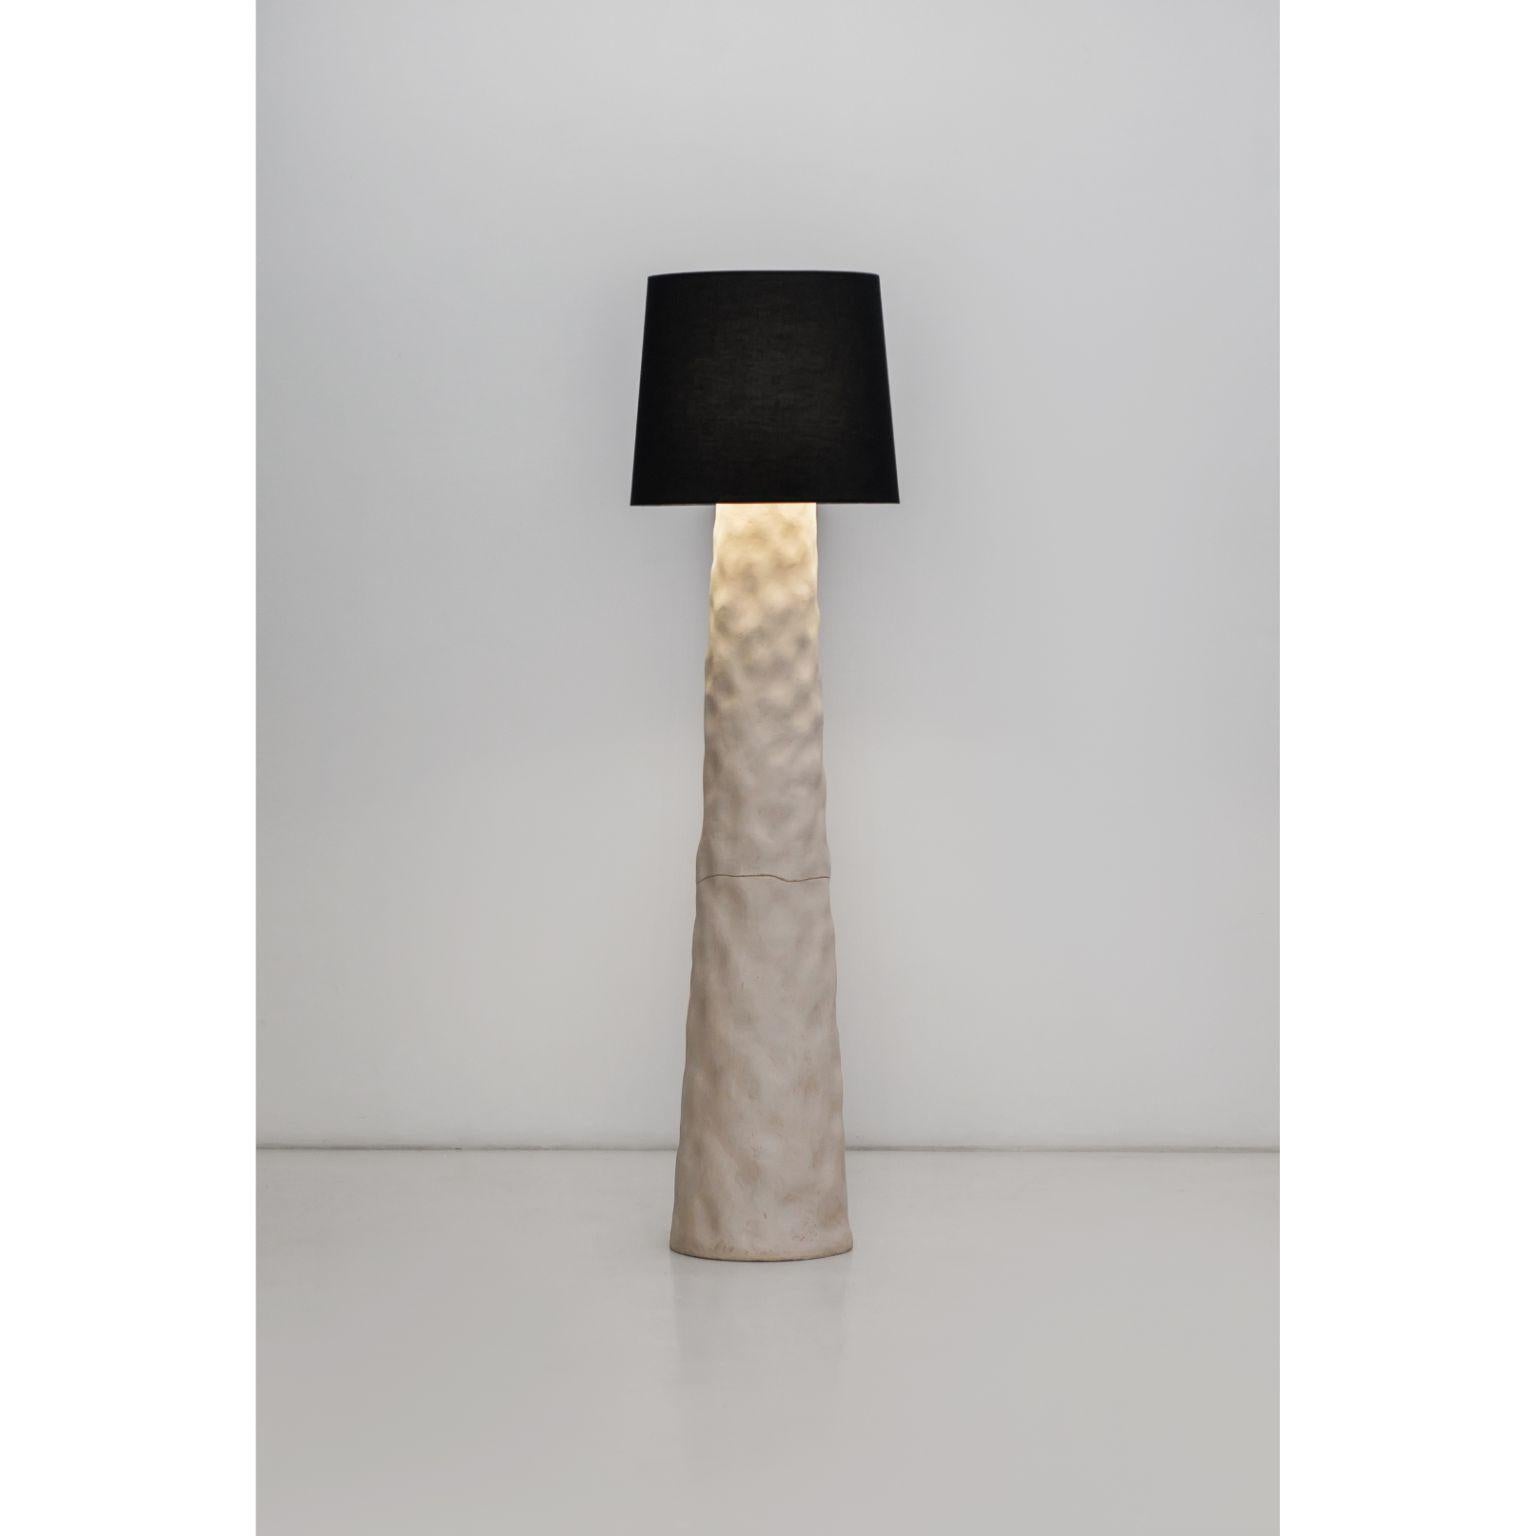 Contemporary floor lamp by Faina
Design: Victoriya Yakusha
Material: Cotton, ceramics
Dimensions: 50 x 170 cm
Weight: 50 kg

*All our lamps can be wired according to each country. If sold to the USA it will be wired for the USA for